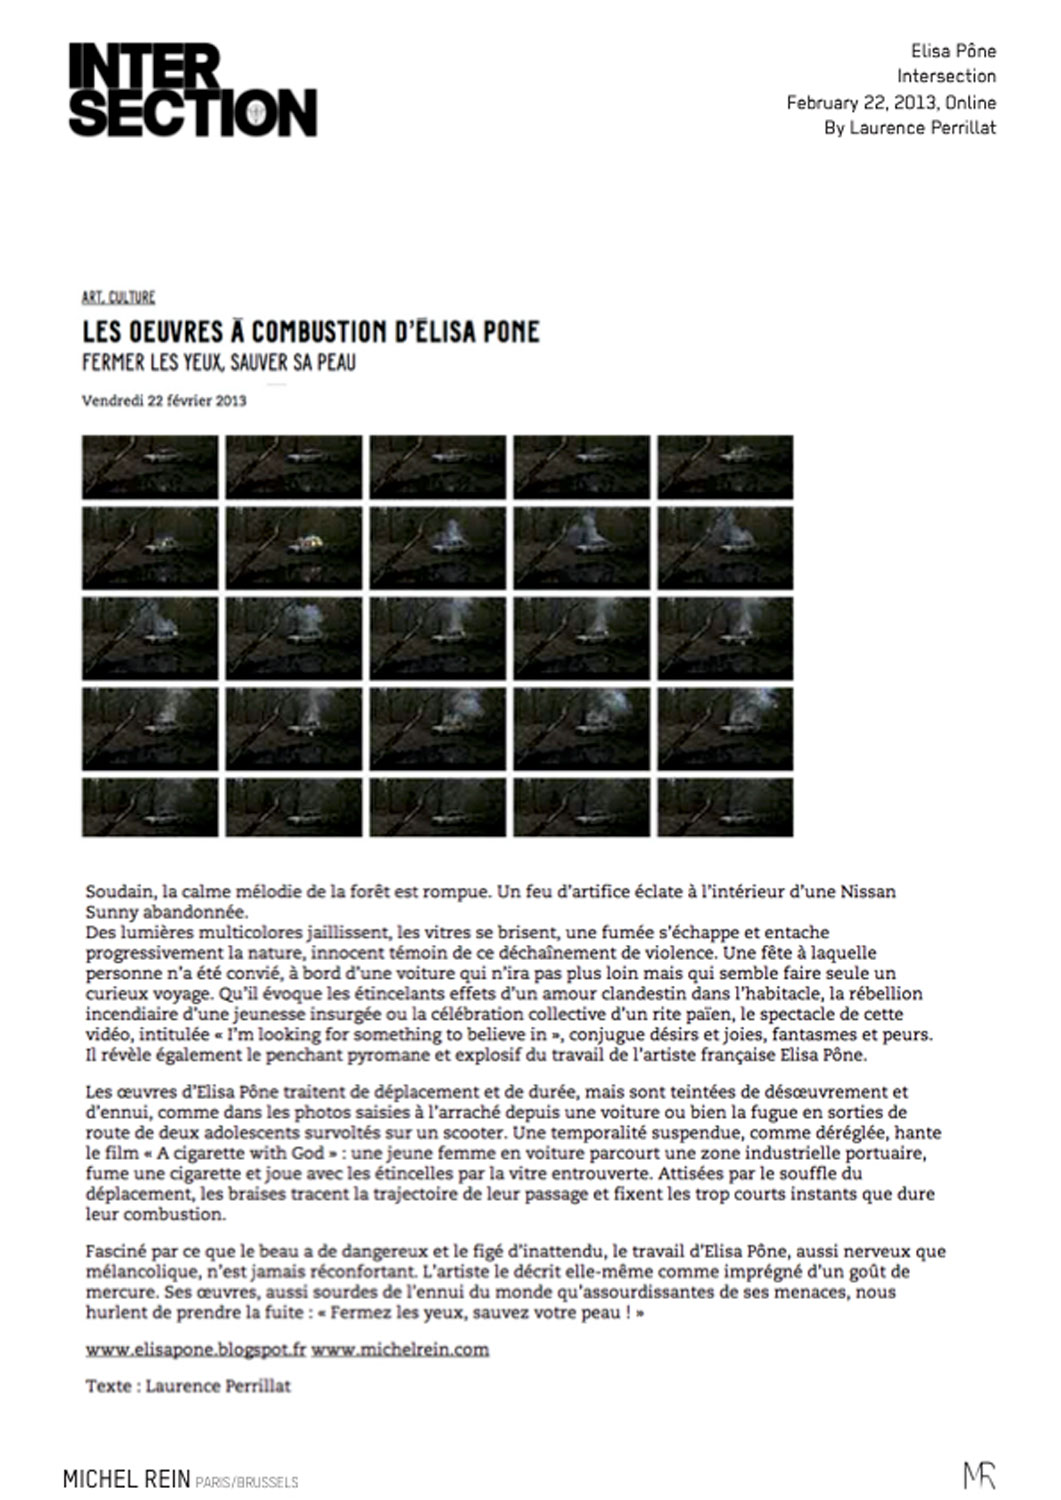 Les oeuvres  combustion d'lisa Pne - Intersection